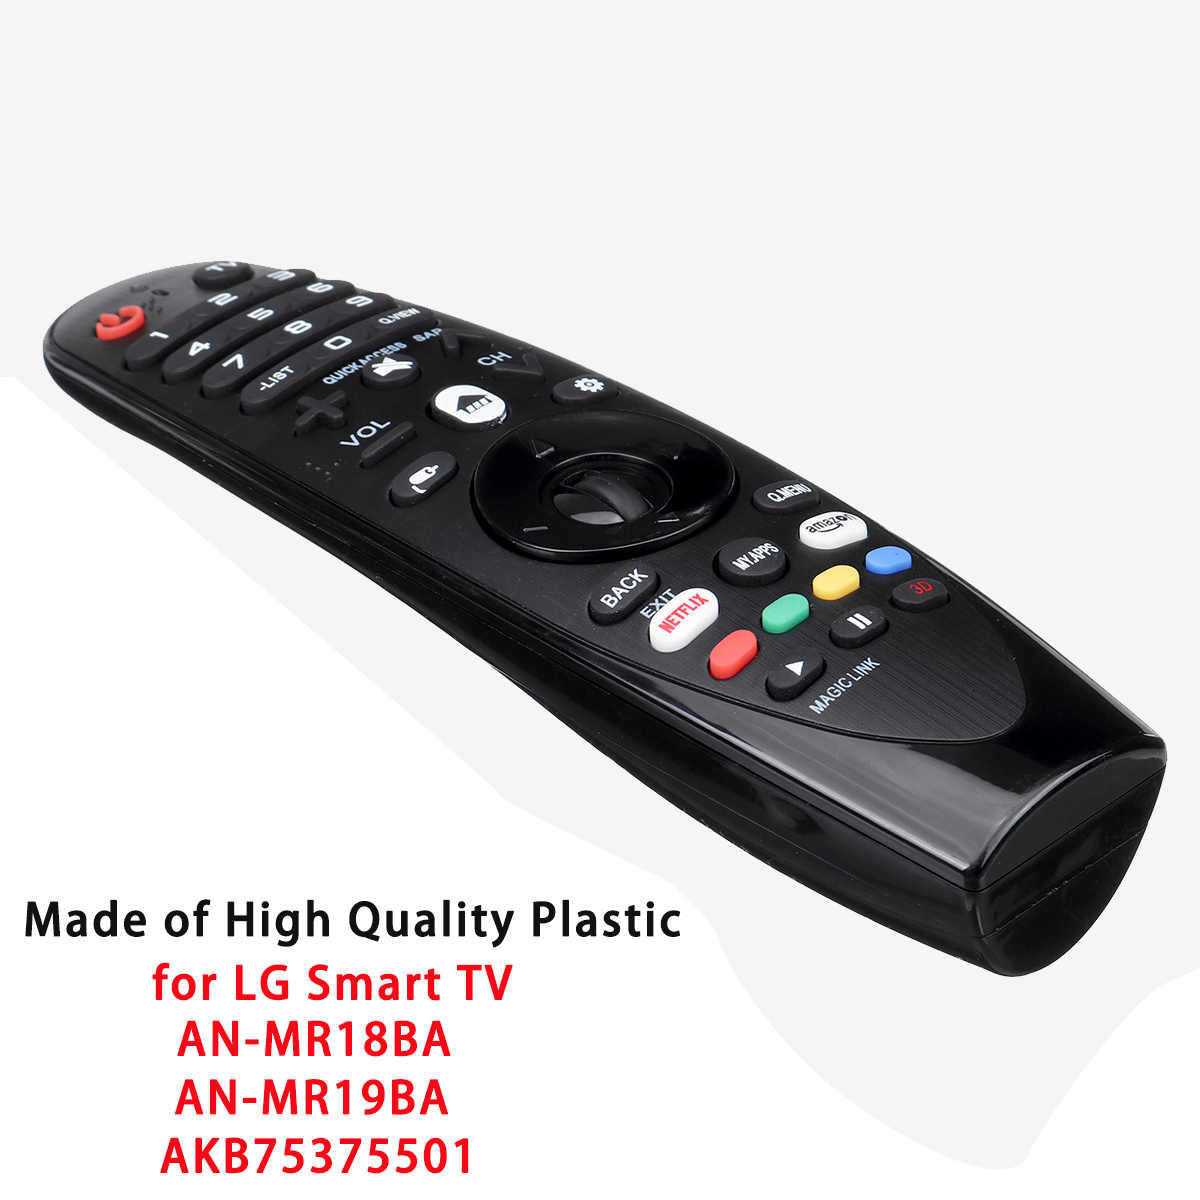 Universal-Infrared-Remote-Control-for-LG-Smart-TV-AN-MR18BA-AKB75375501-AN-MR19-AN-MR600-1937990-2